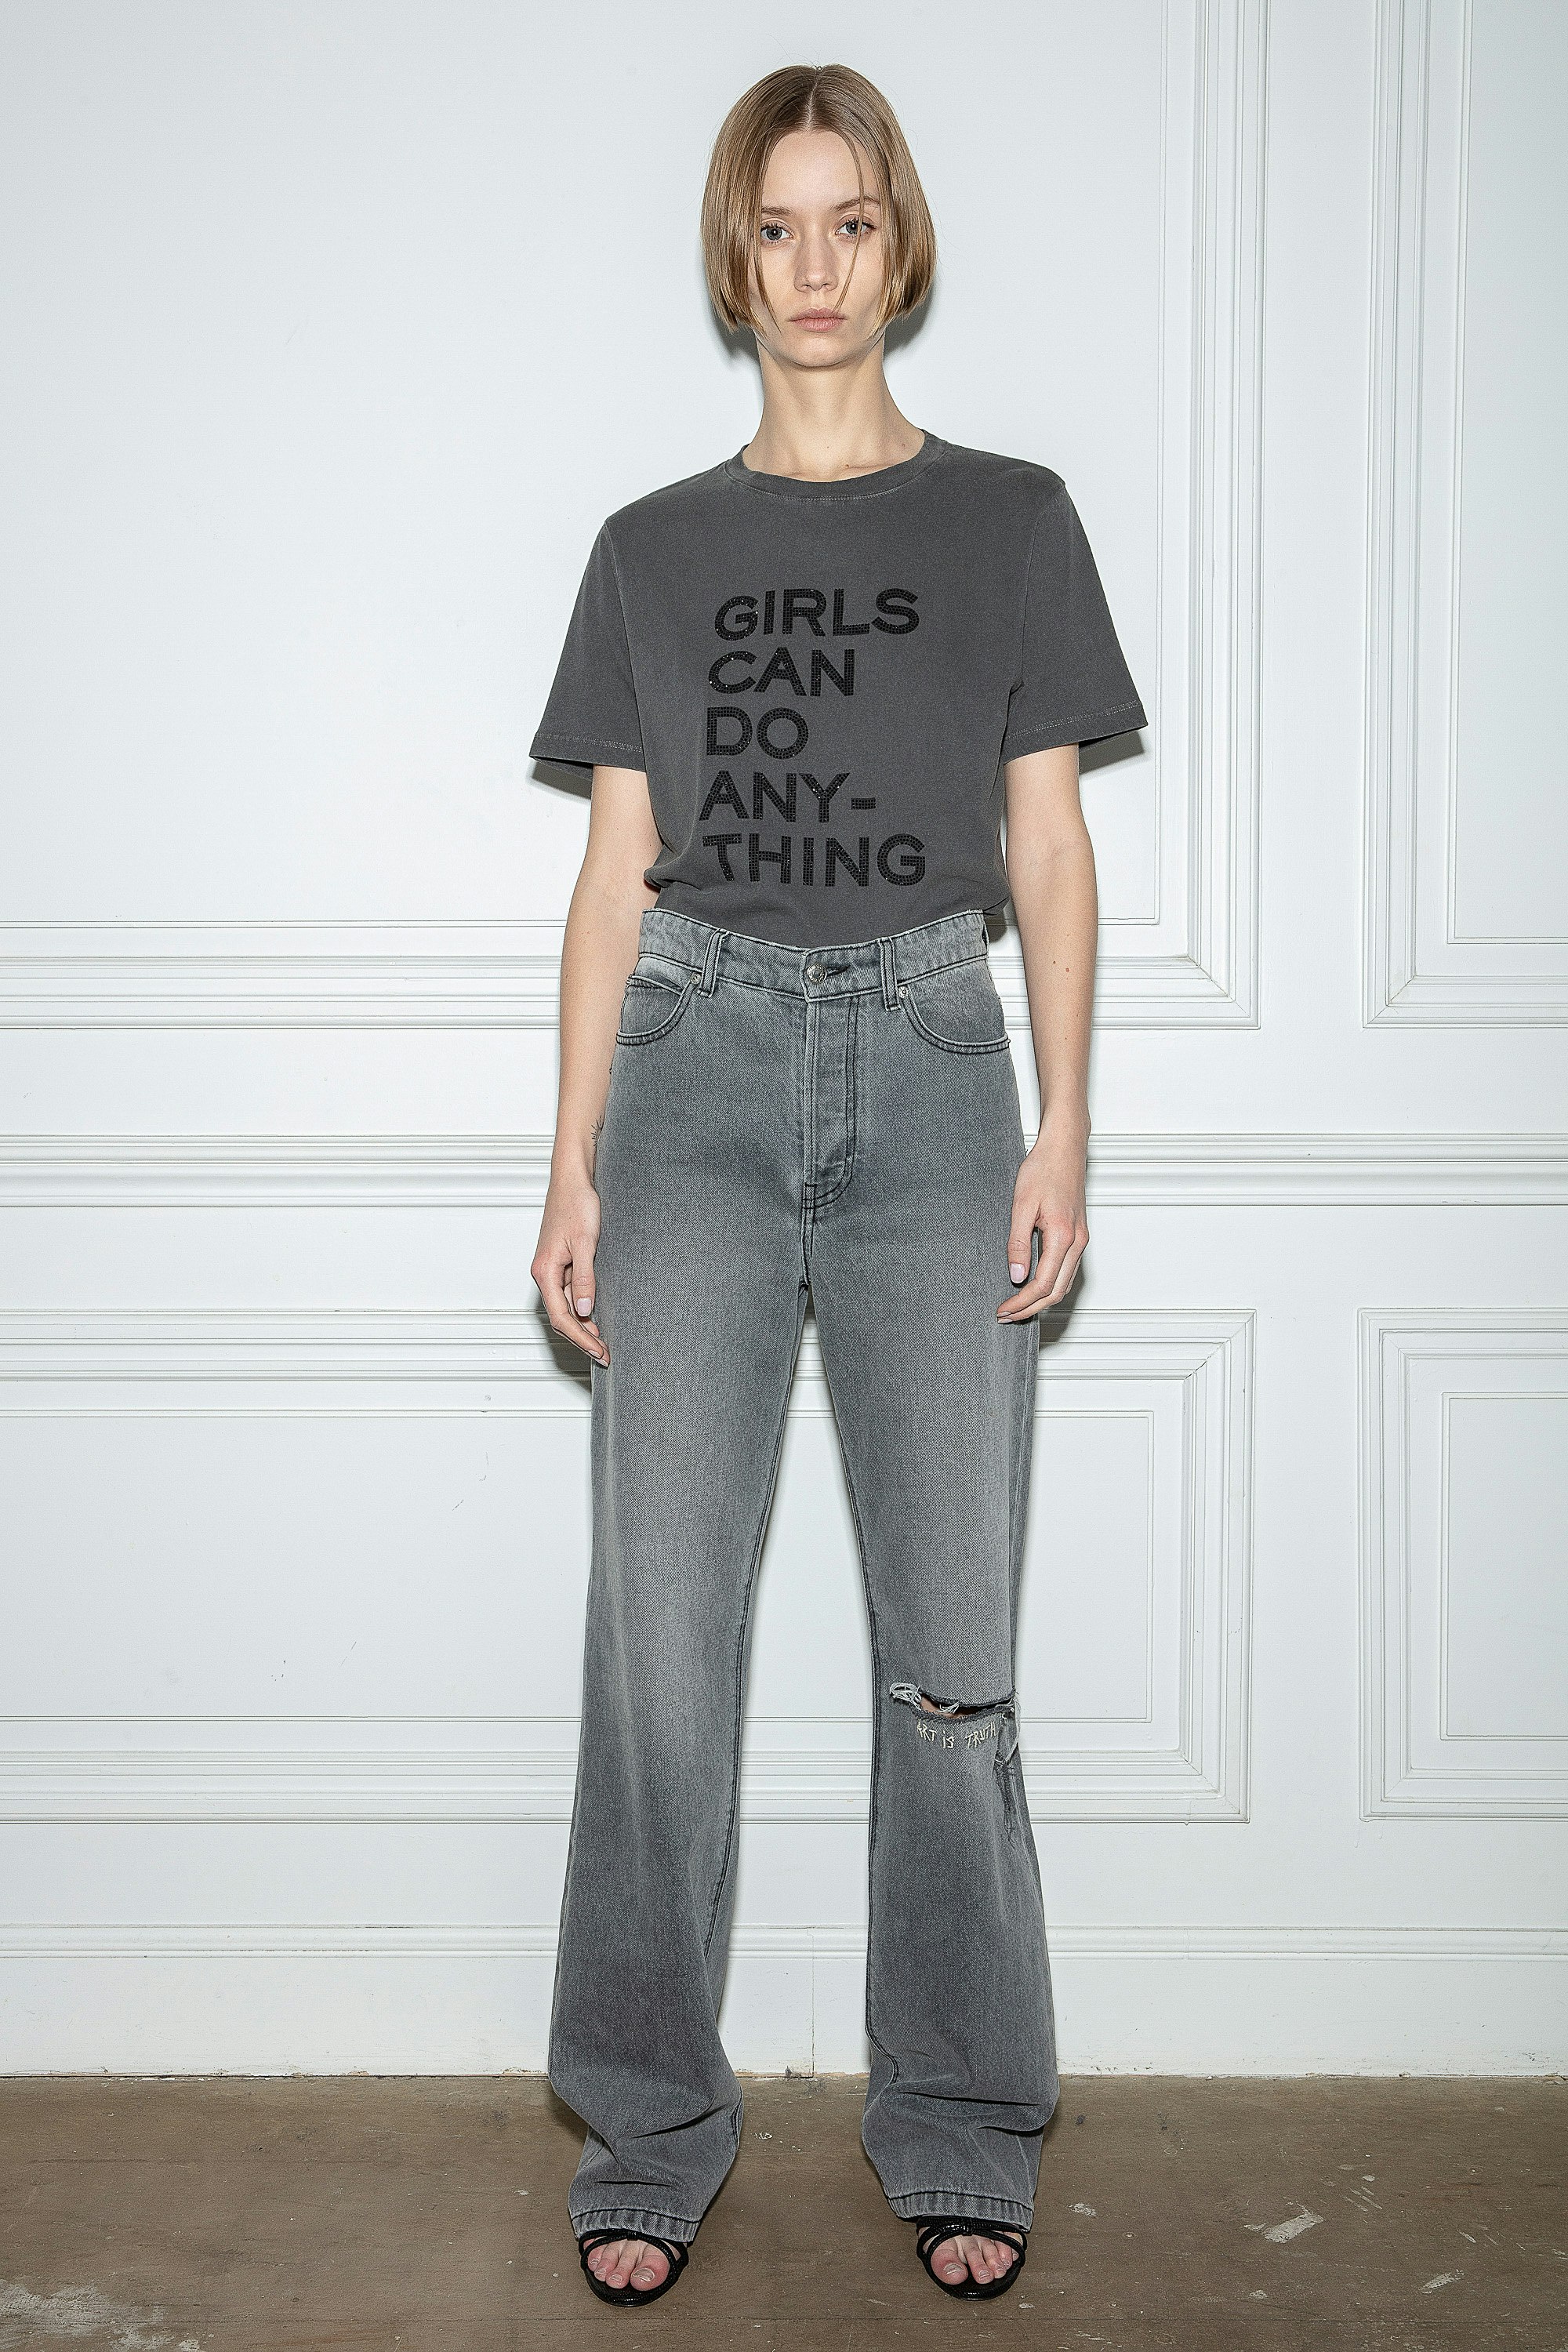 Bella T-Shirt Women’s grey cotton T-shirt with crystal-studded “Girls can do anything” slogan